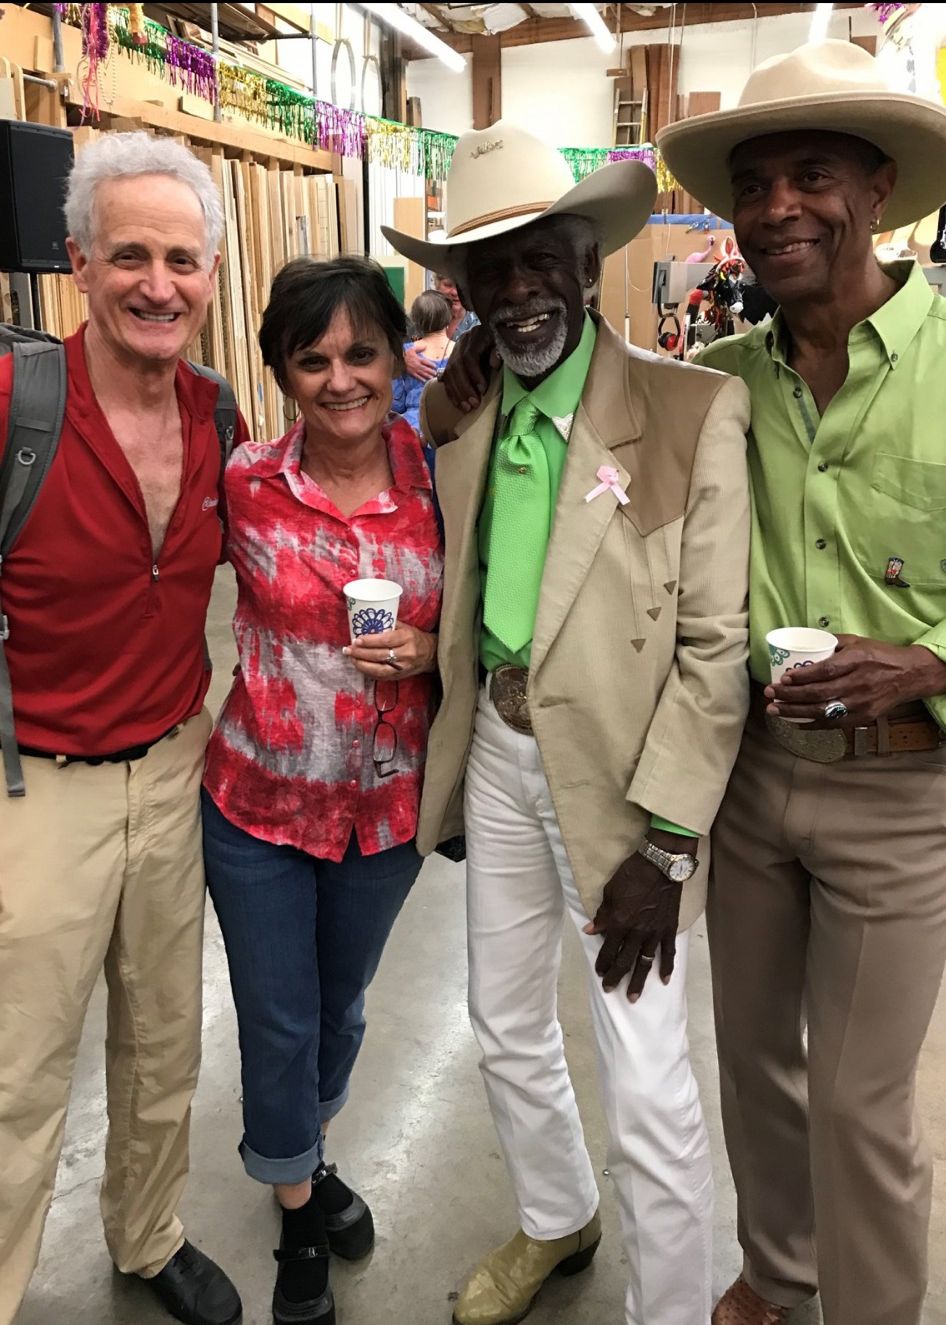 Zydeco with Barb and friends in 2019